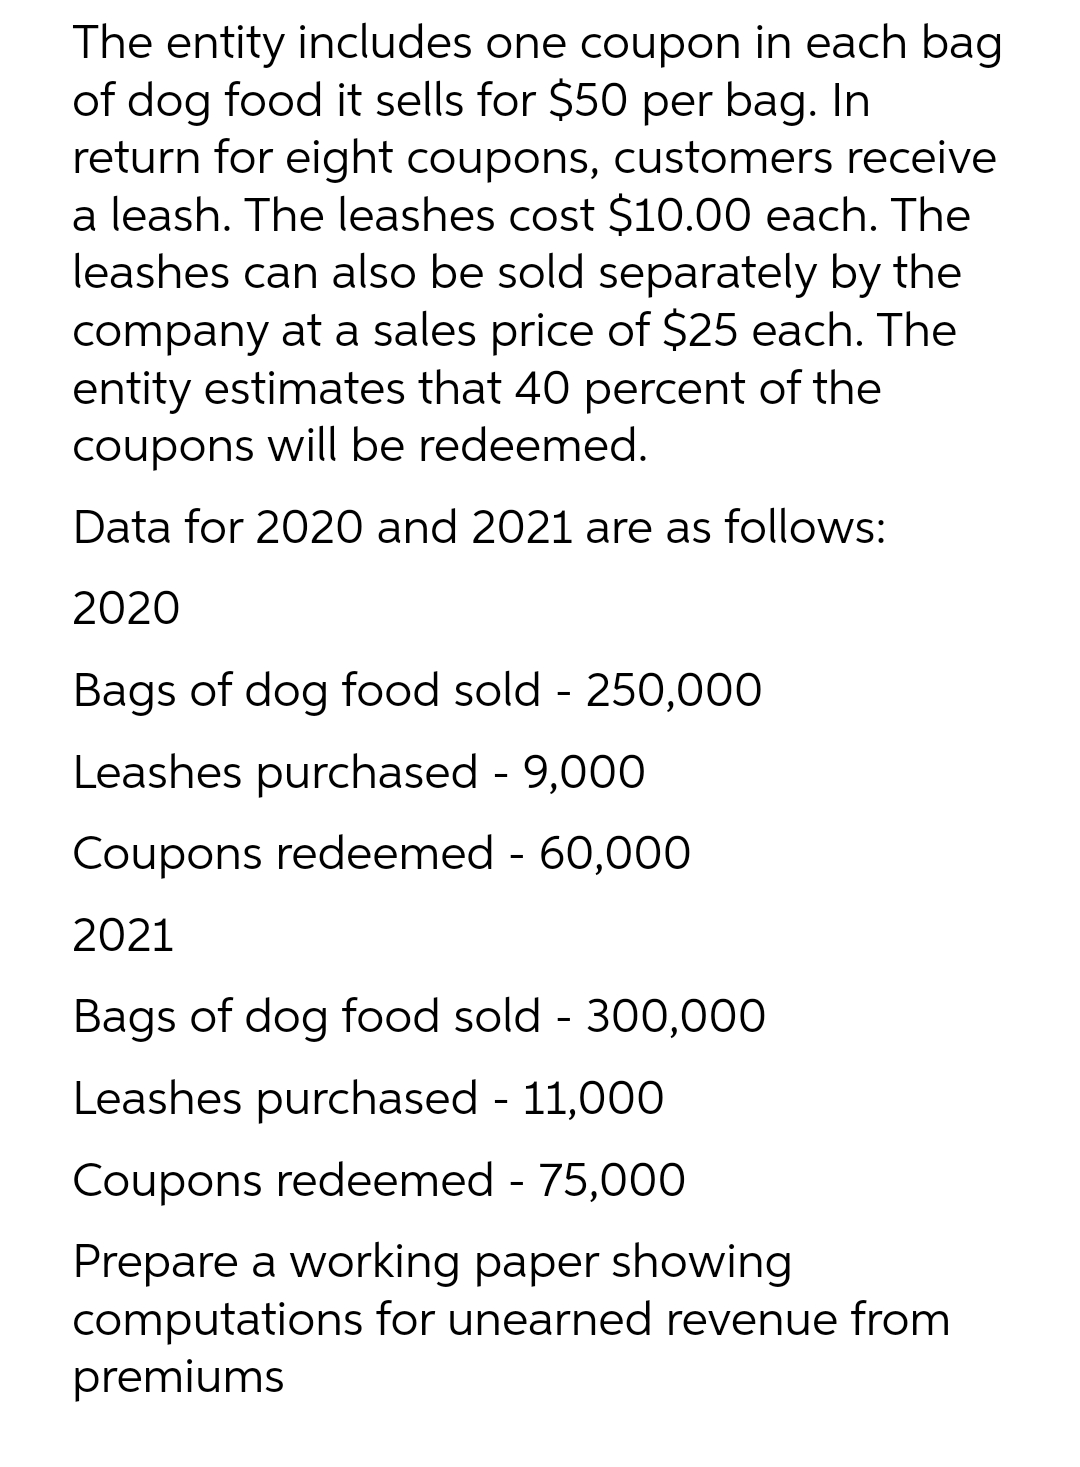 The entity includes one coupon in each bag
of dog food it sells for $50 per bag. In
return for eight coupons, customers receive
a leash. The leashes cost $10.00 each. The
leashes can also be sold separately by the
company at a sales price of $25 each. The
entity estimates that 40 percent of the
coupons will be redeemed.
Data for 2020 and 2021 are as follows:
2020
Bags of dog food sold - 250,000
Leashes purchased - 9,000
Coupons redeemed - 60,000
2021
Bags of dog food sold - 300,000
Leashes purchased - 11,000
Coupons redeemed - 75,000
Prepare a working paper showing
computations for unearned revenue from
premiums